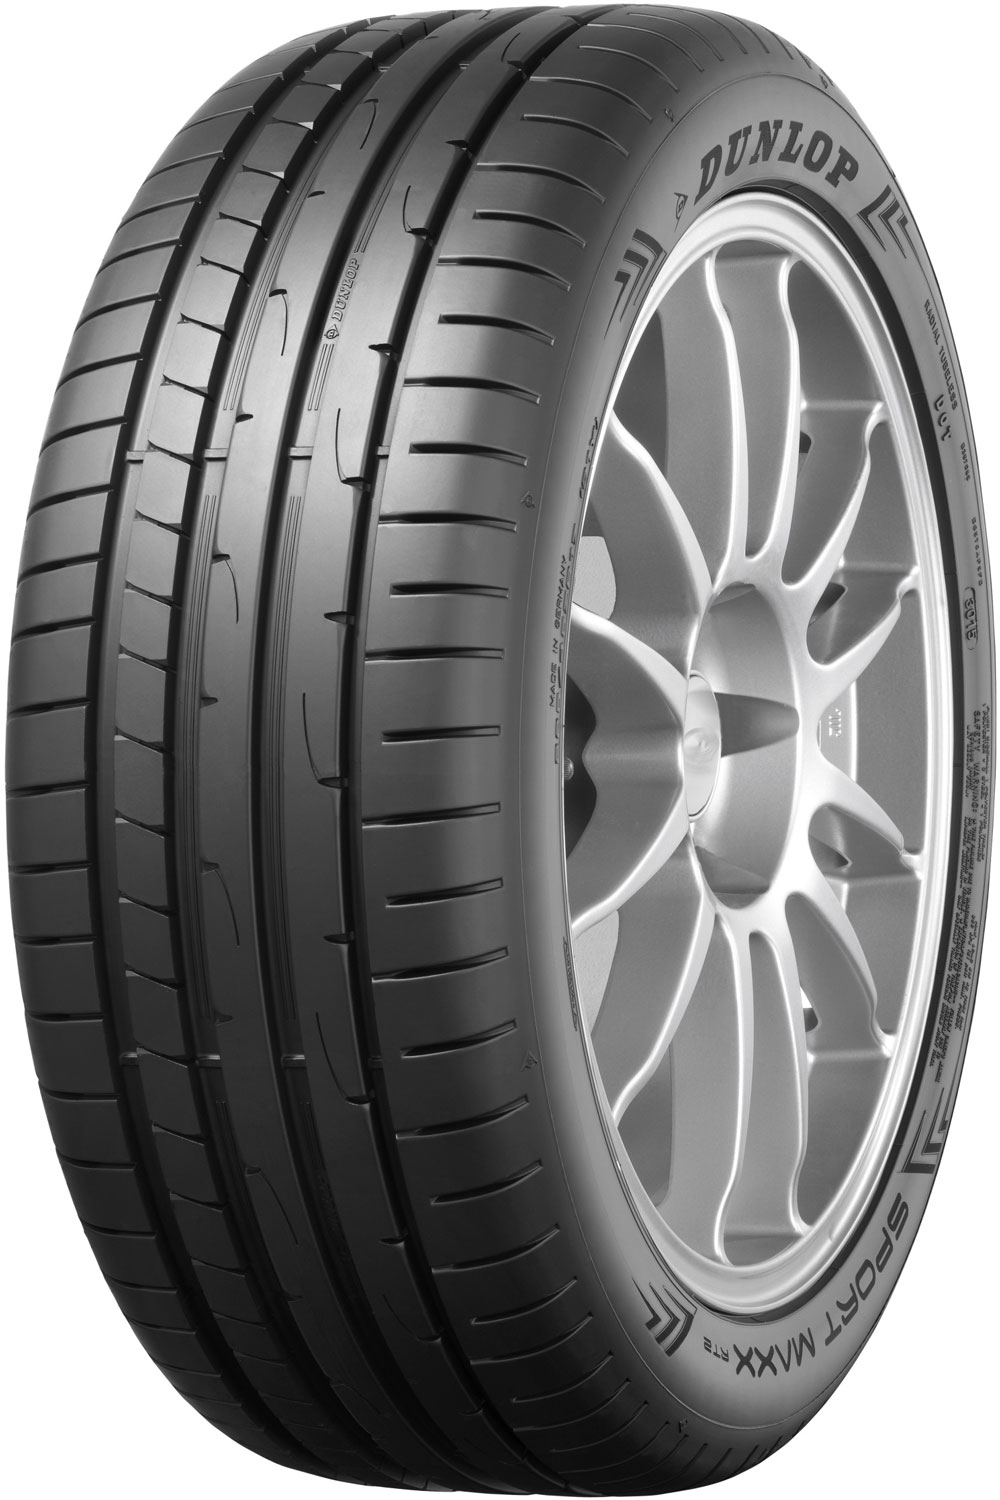 Anvelope jeep DUNLOP SP MAXX RT 2 MO XL MERCEDES FP 285/40 R20 108Y